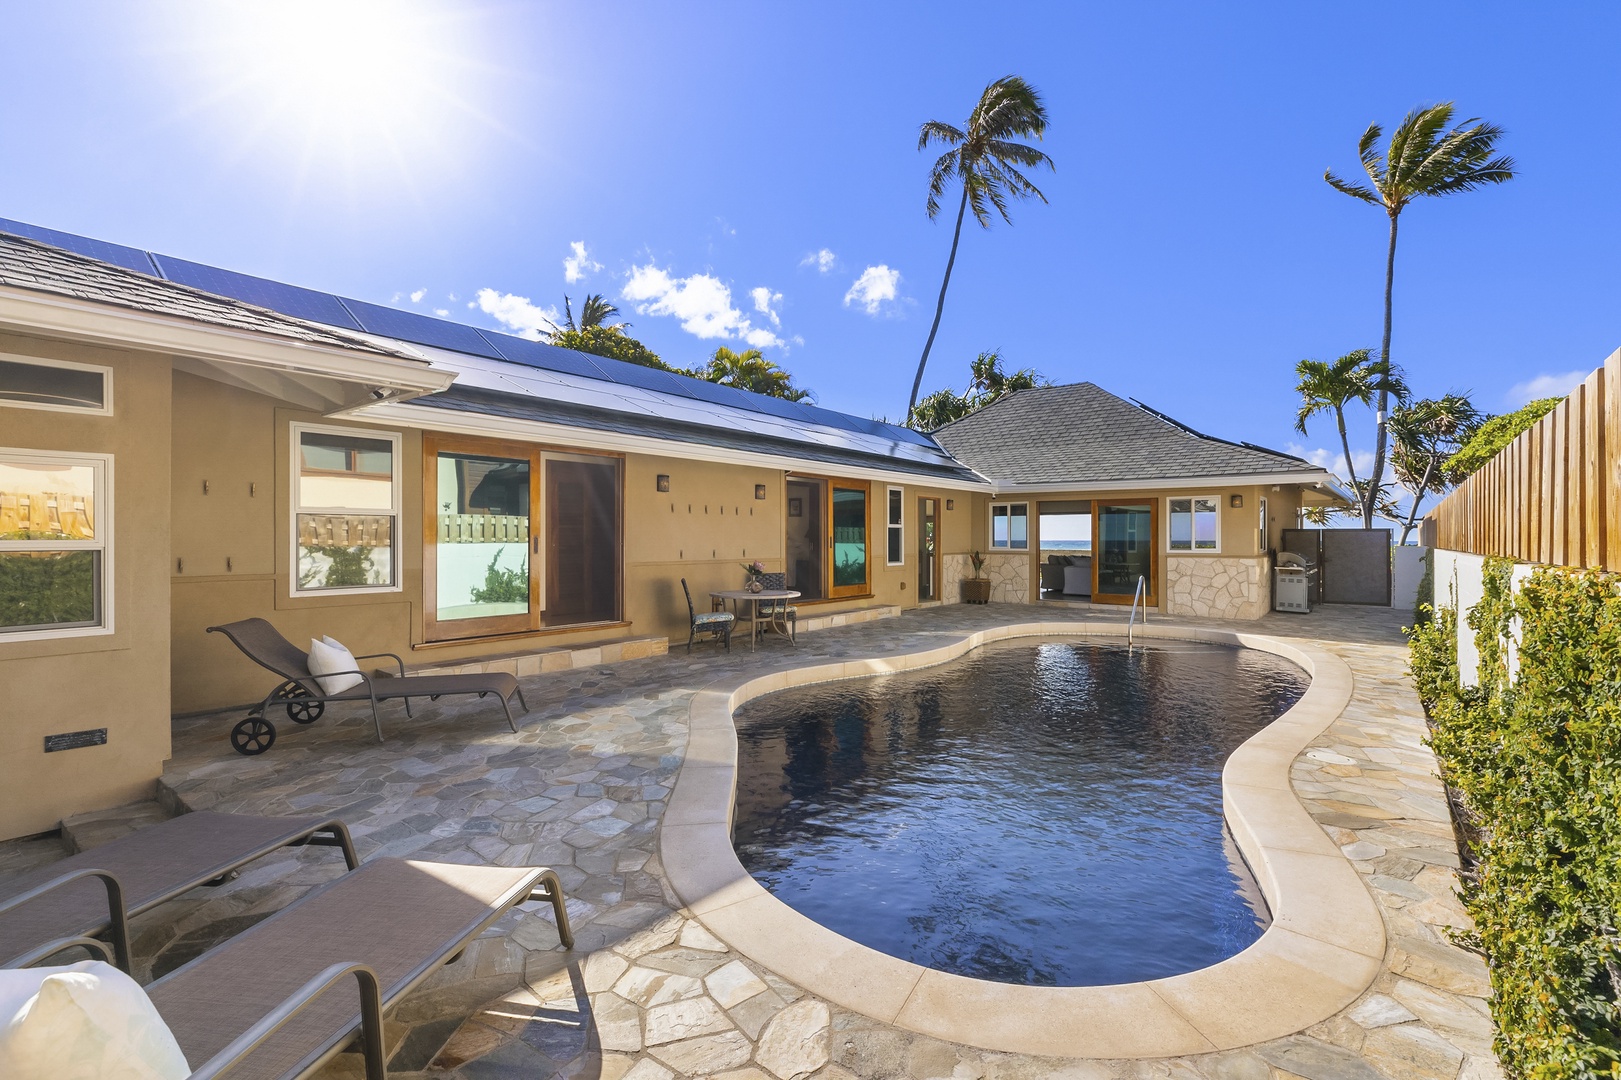 Honolulu Vacation Rentals, Hale Makai at Diamond Head - Private Pool Area Furnished seating and Lounger Chairs